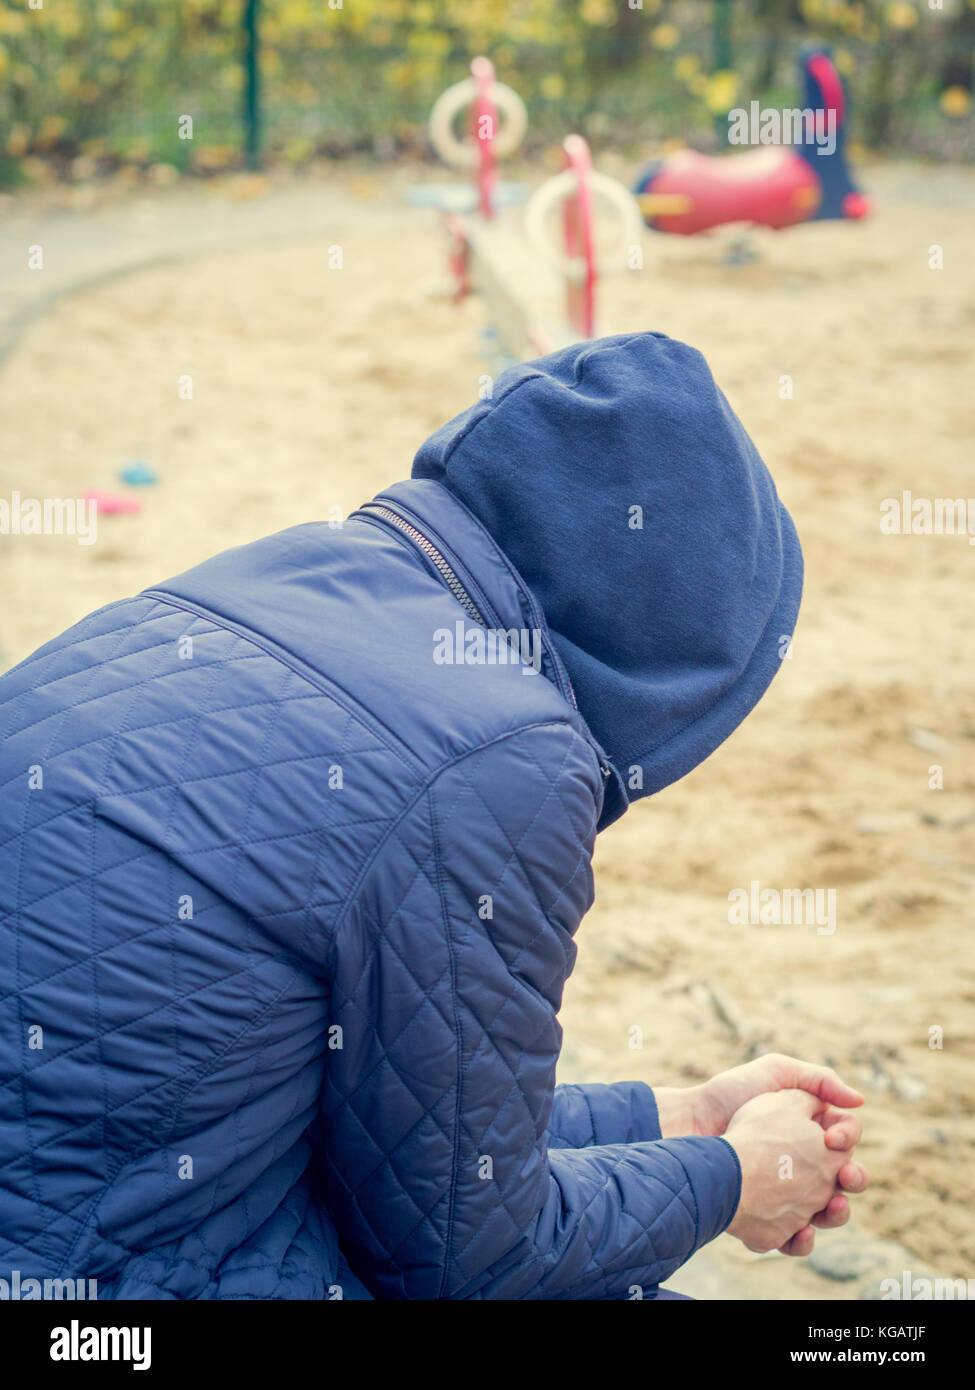 Lonley man looking at a playground Stock Photo